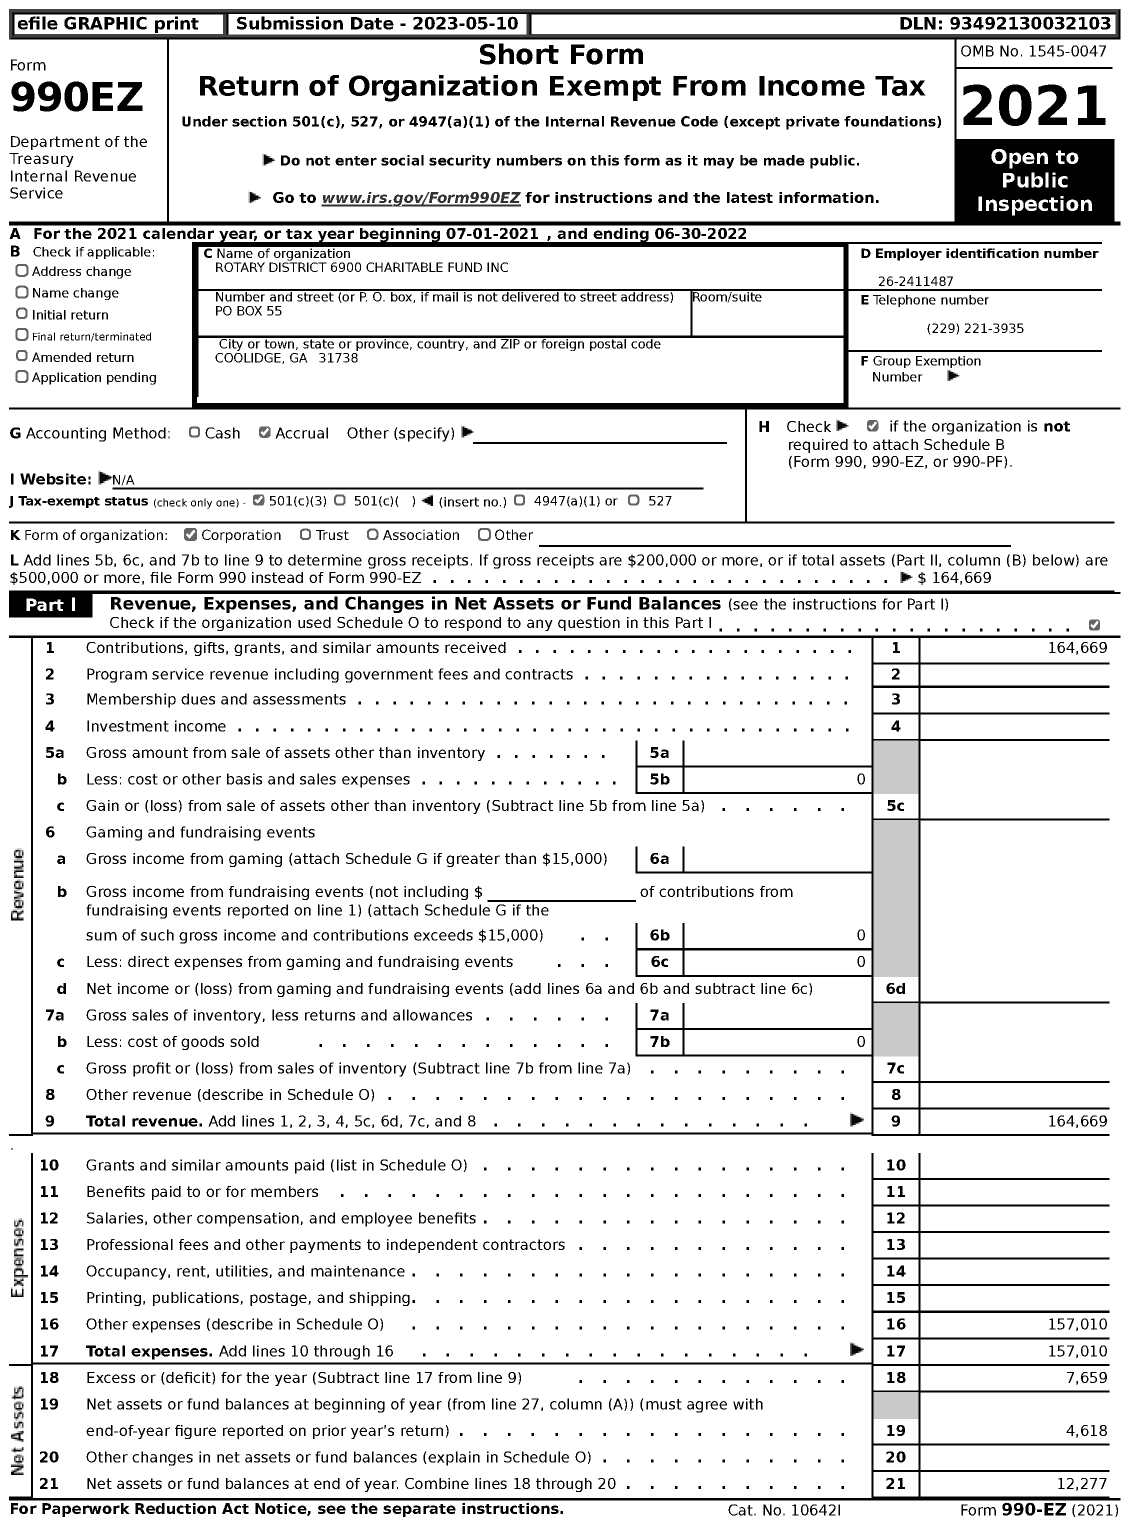 Image of first page of 2021 Form 990EZ for Rotary District 6900 Charitable Fund